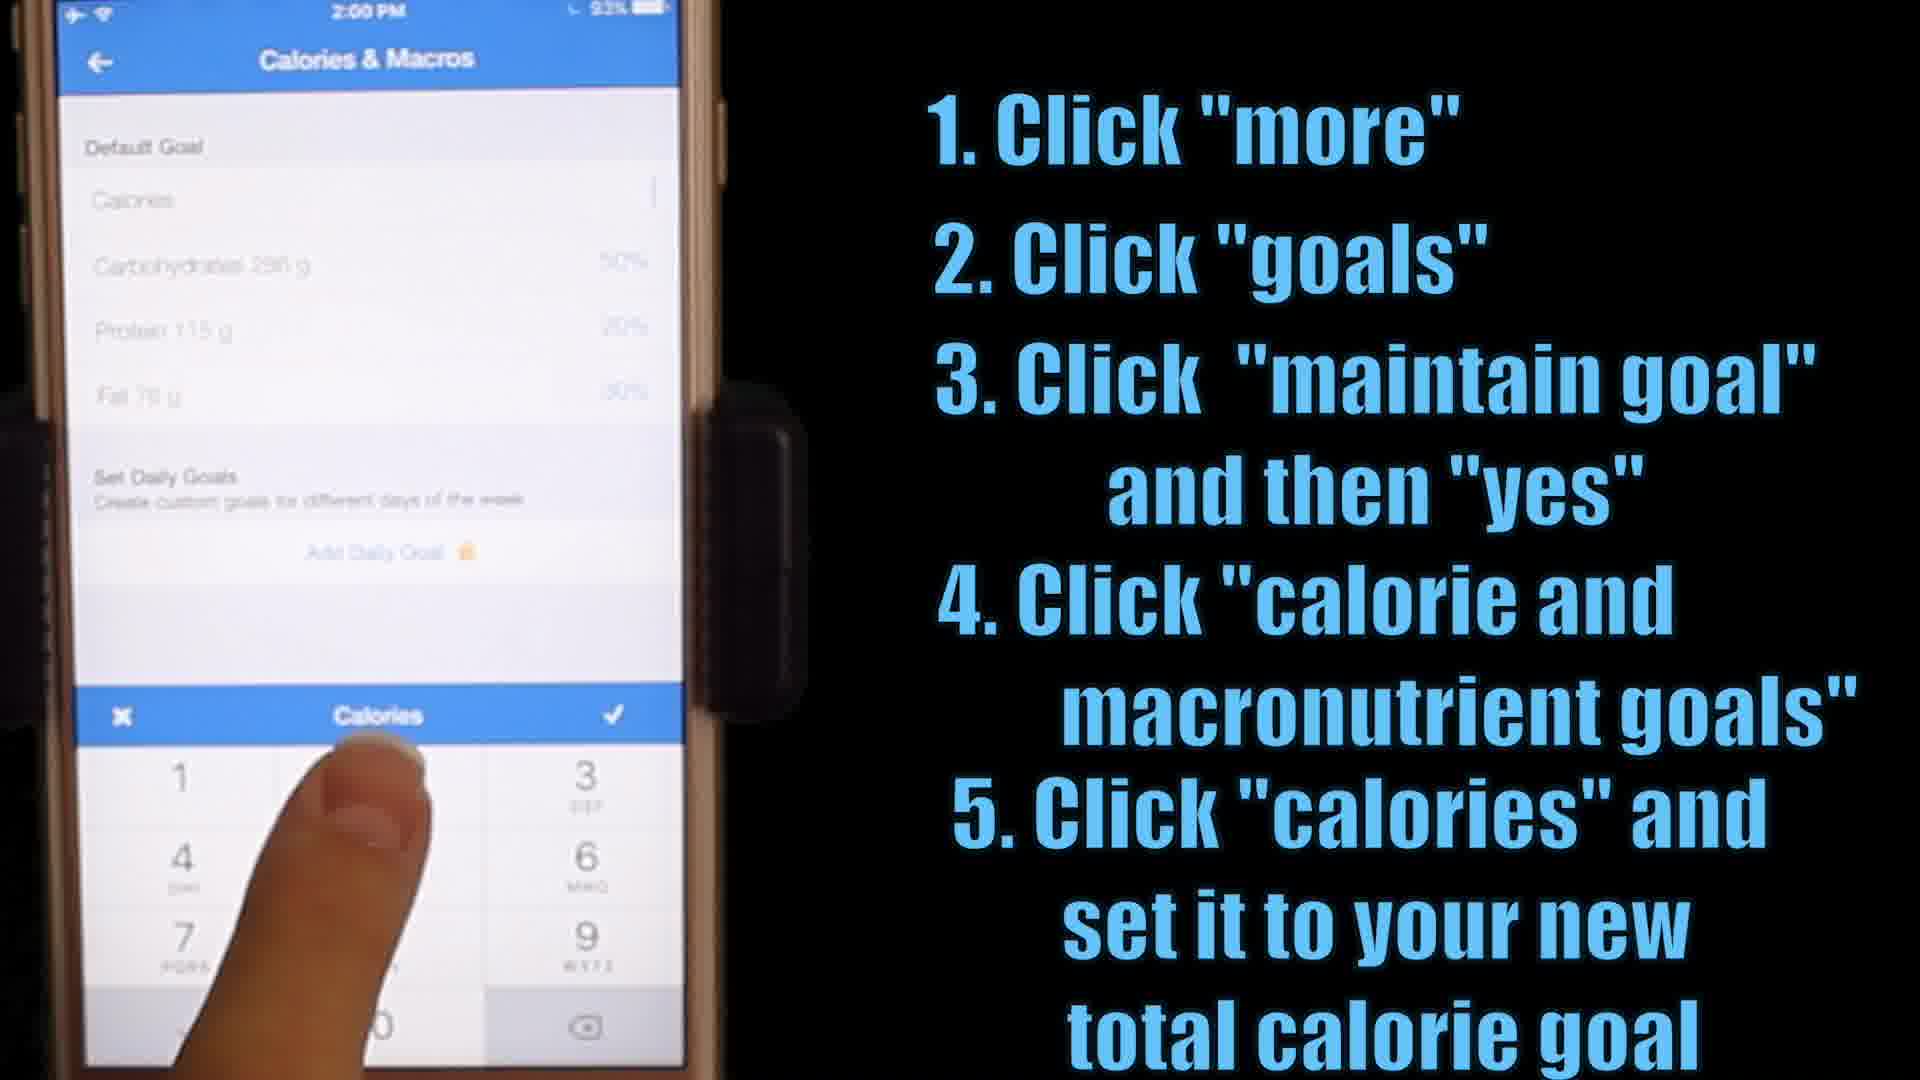 macros for weight loss calculator free